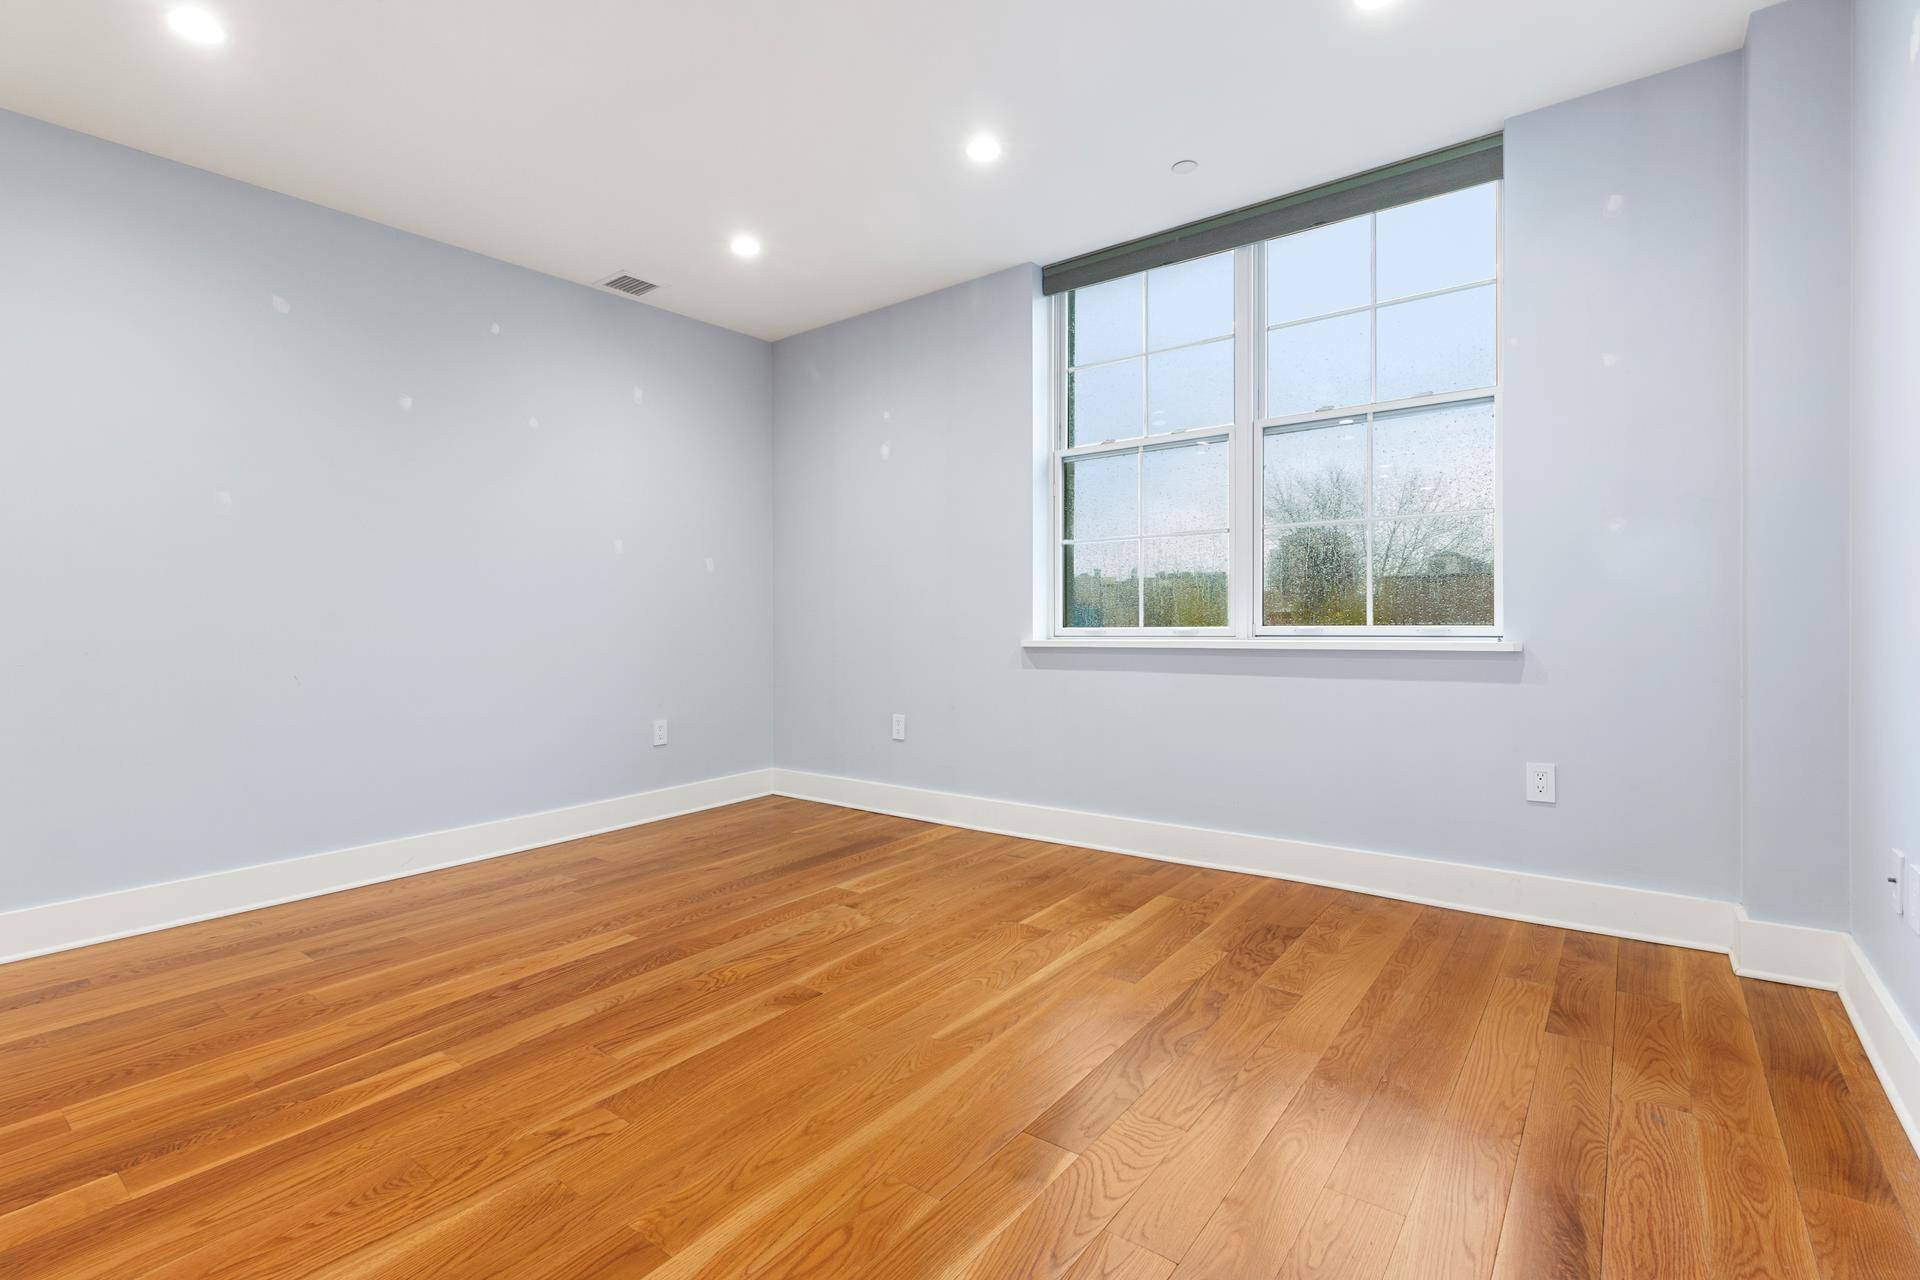 Residence 503 is a spacious two bedroom home with oversized windows and wide plank wood flooring throughout.